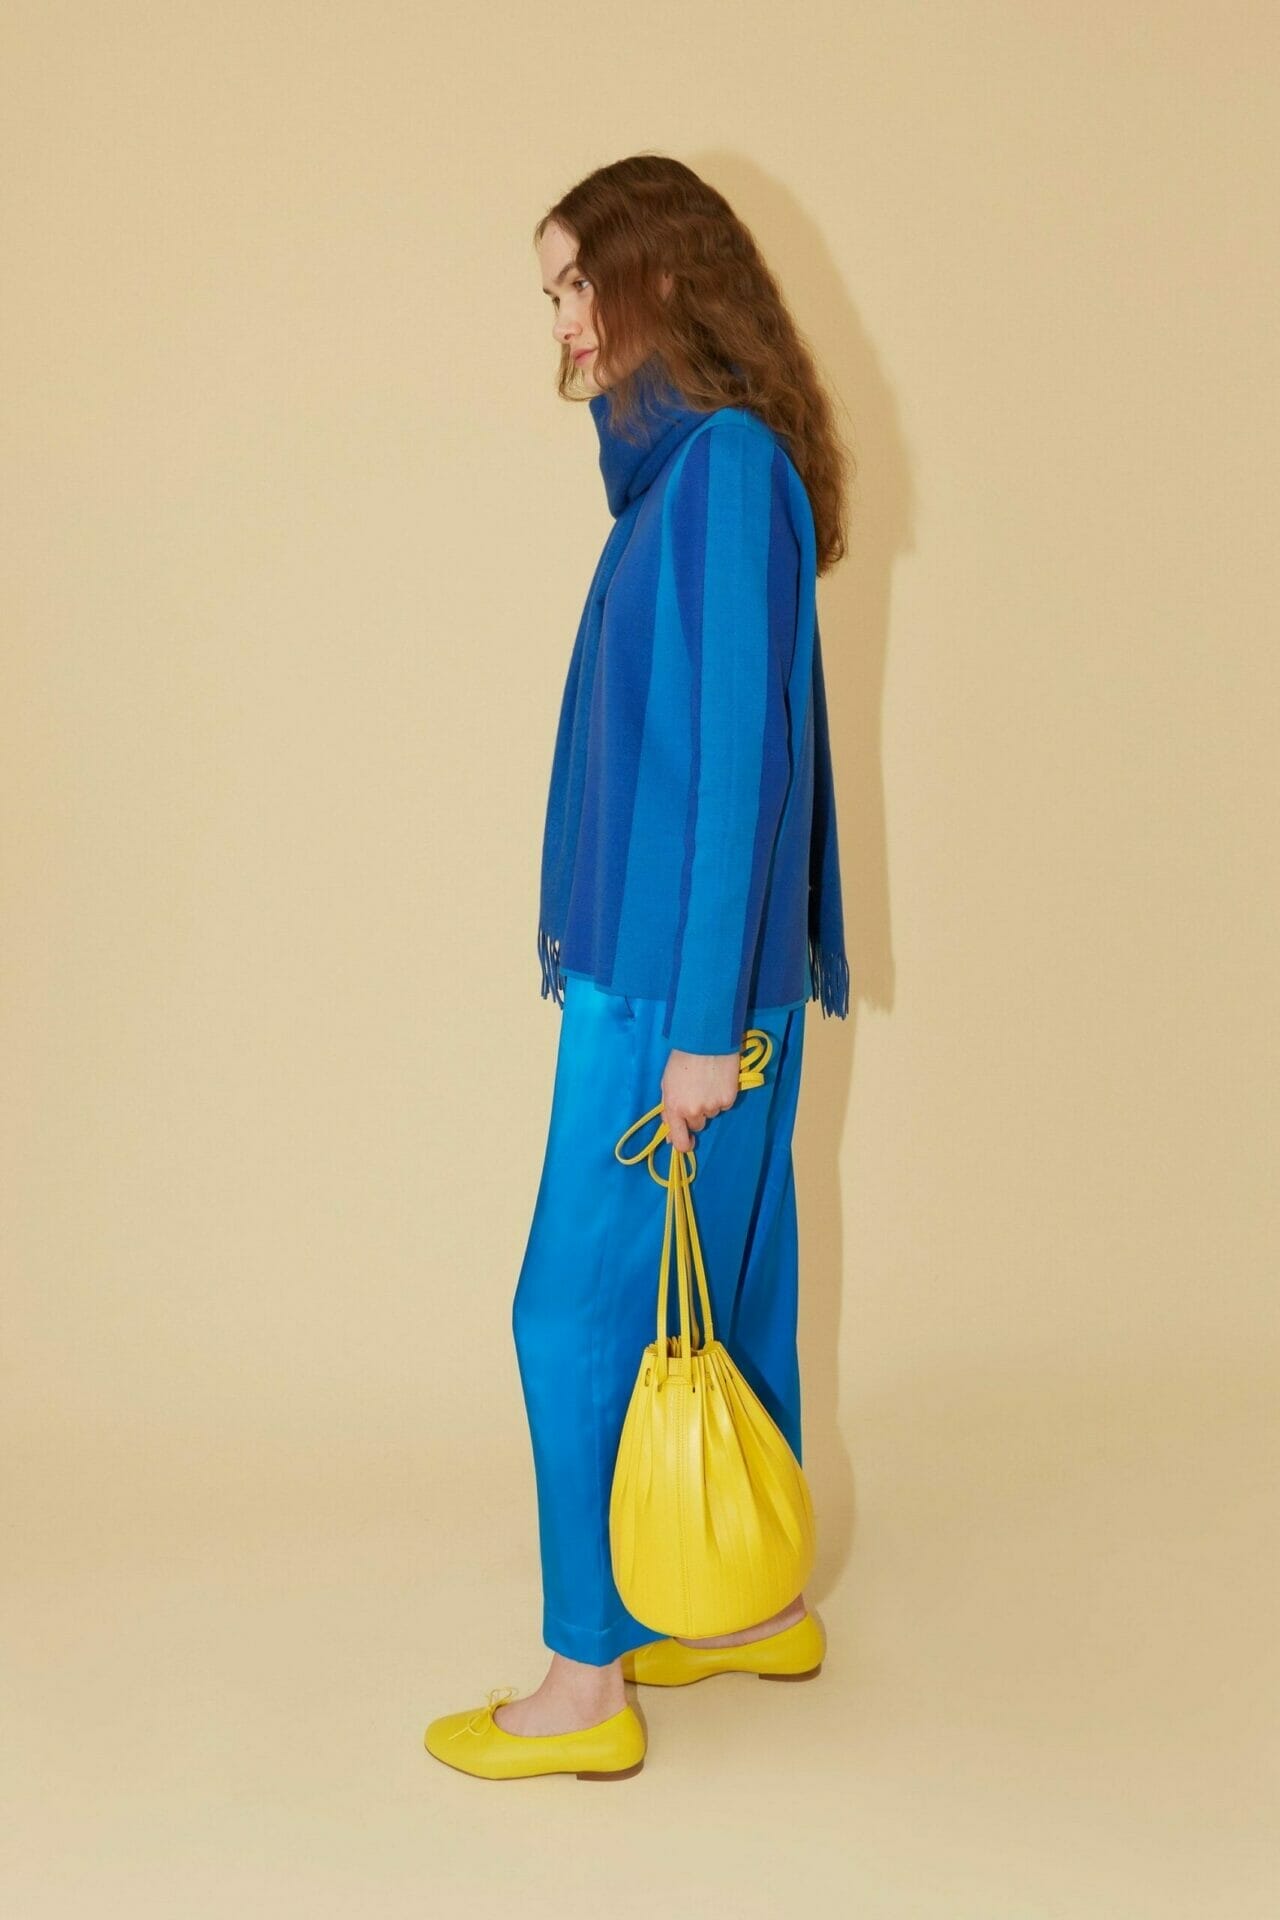 RUNWAY MAGAZINE ® Collections. RUNWAY NOW / RUNWAY NEWMansur Gavriel Ready-to-Wear Fall-Winter 2019-2020.